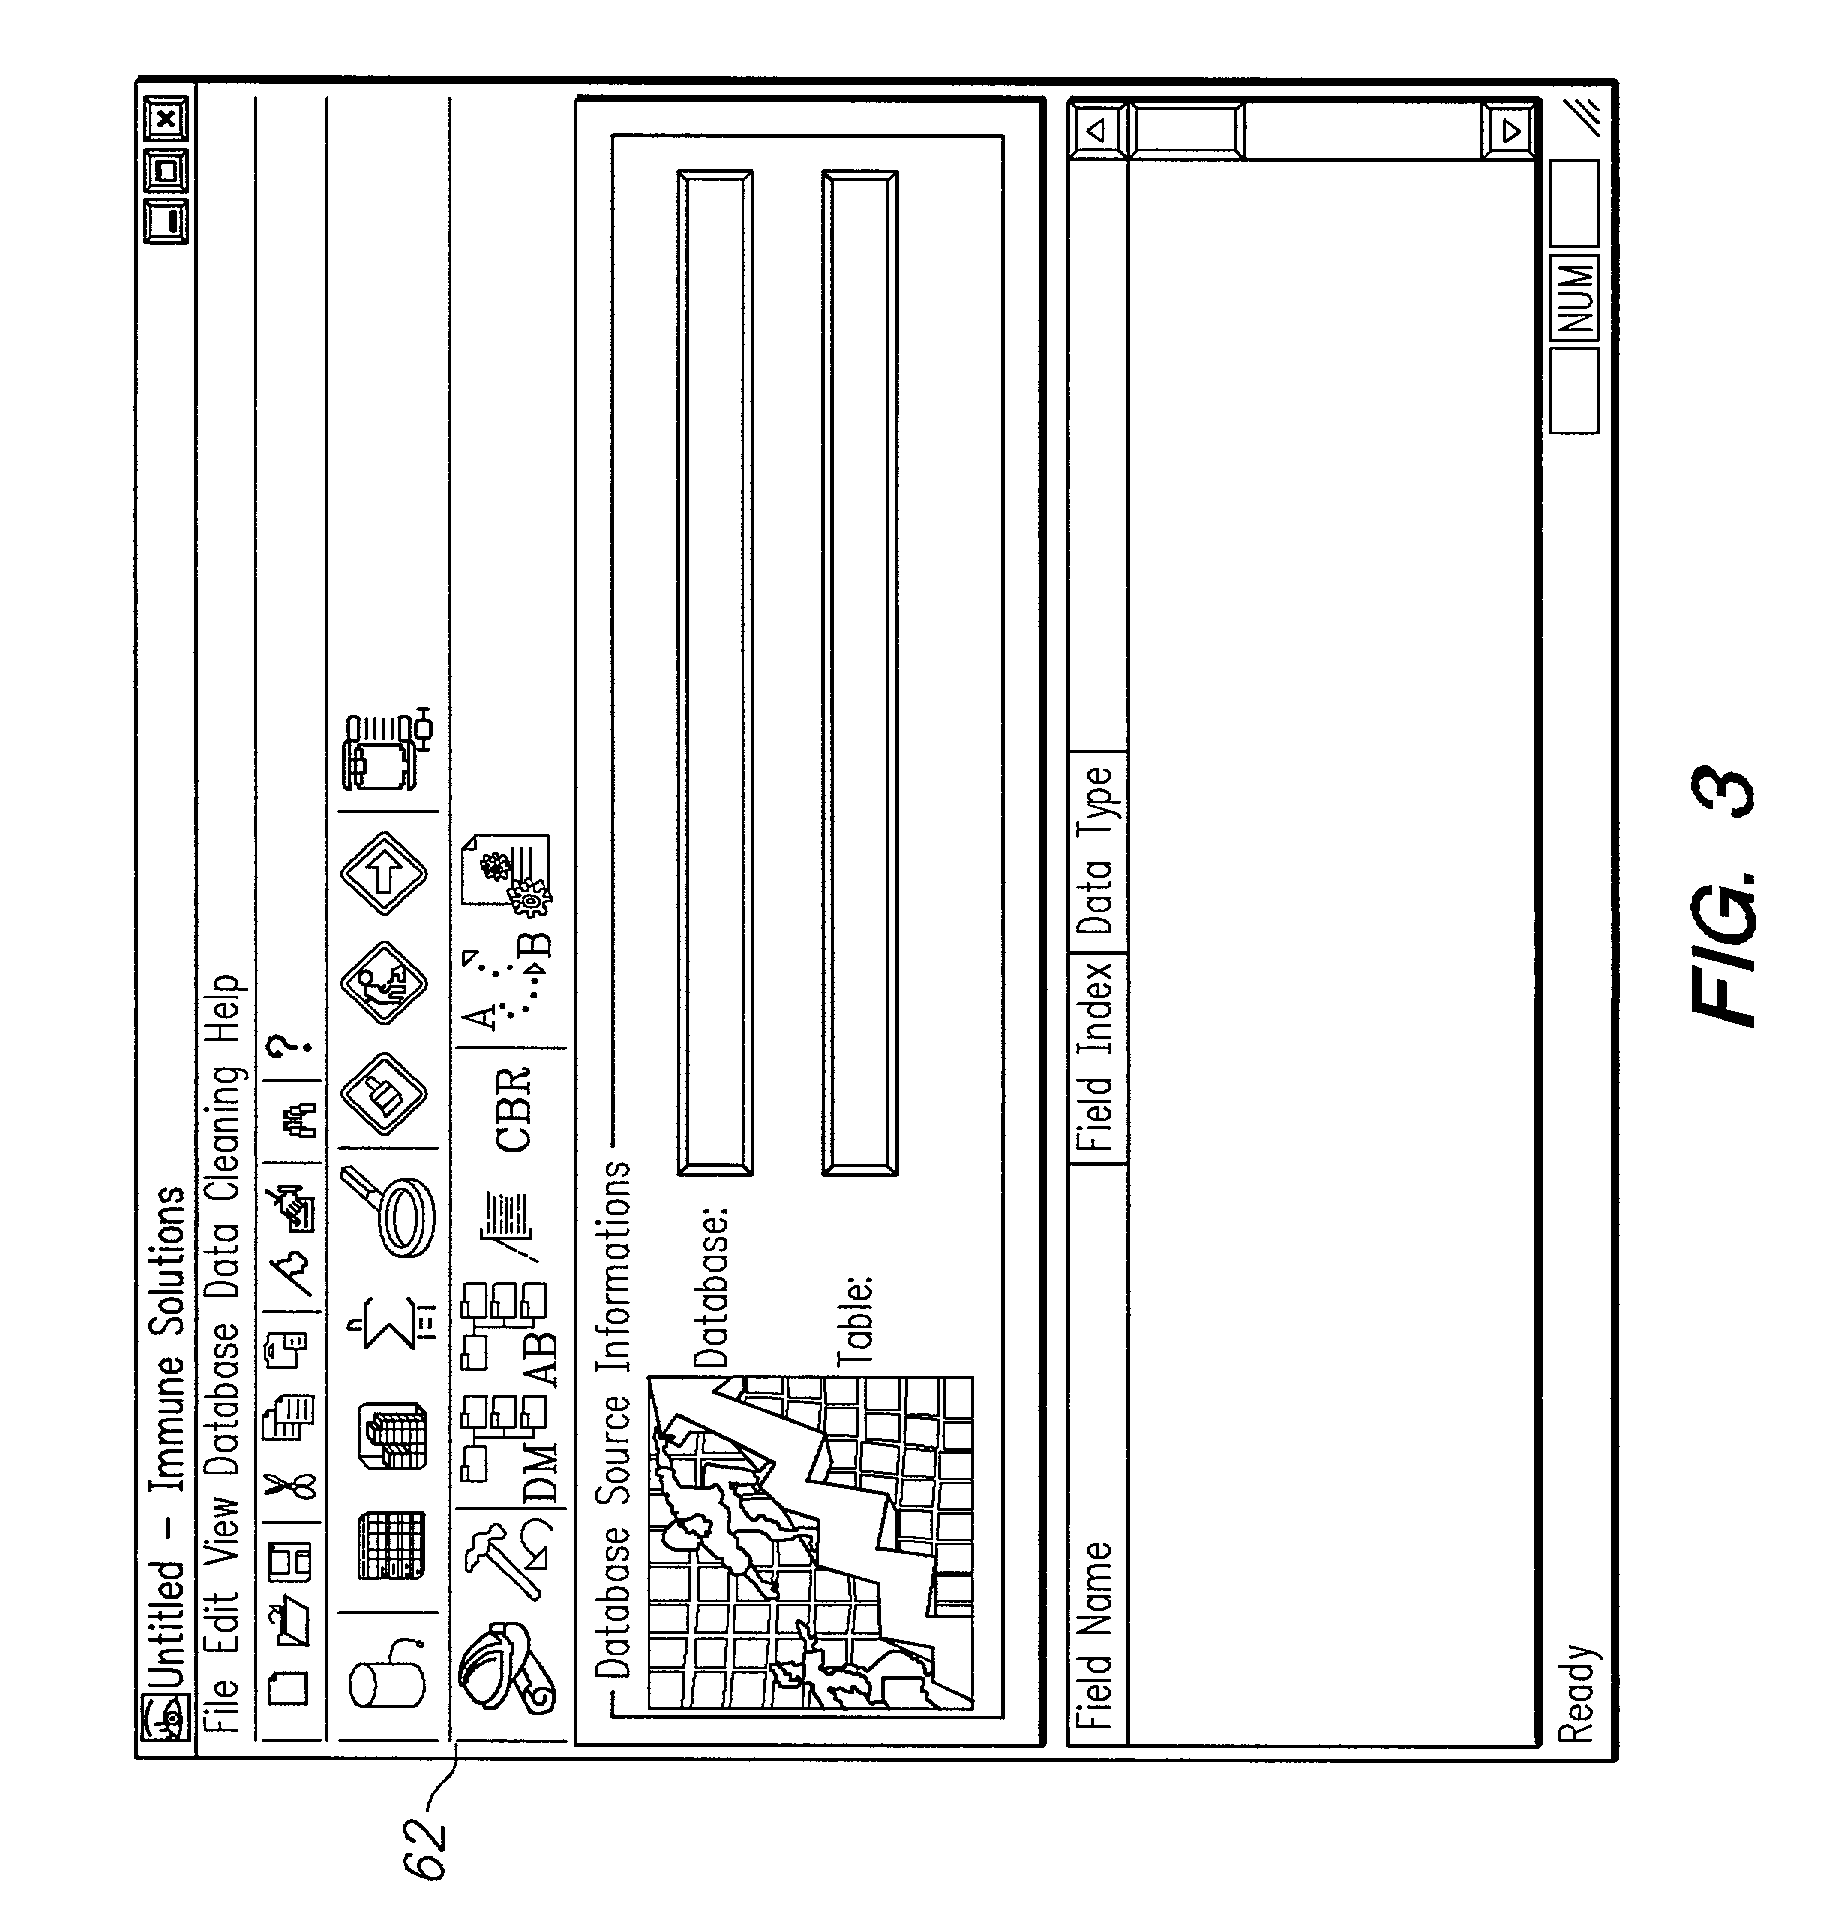 Systems and methods for dynamic detection and prevention of electronic fraud